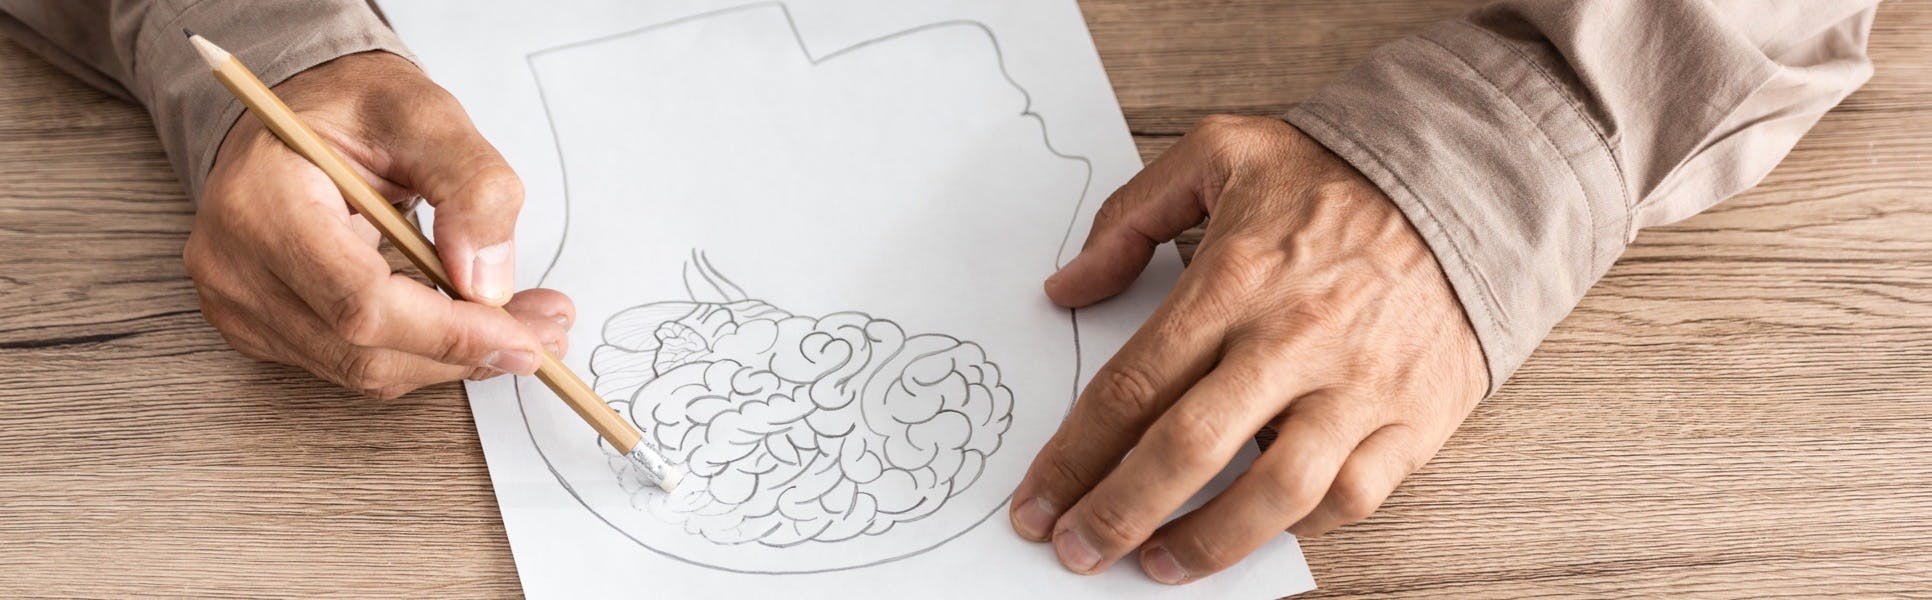 Person sketching picture of brain